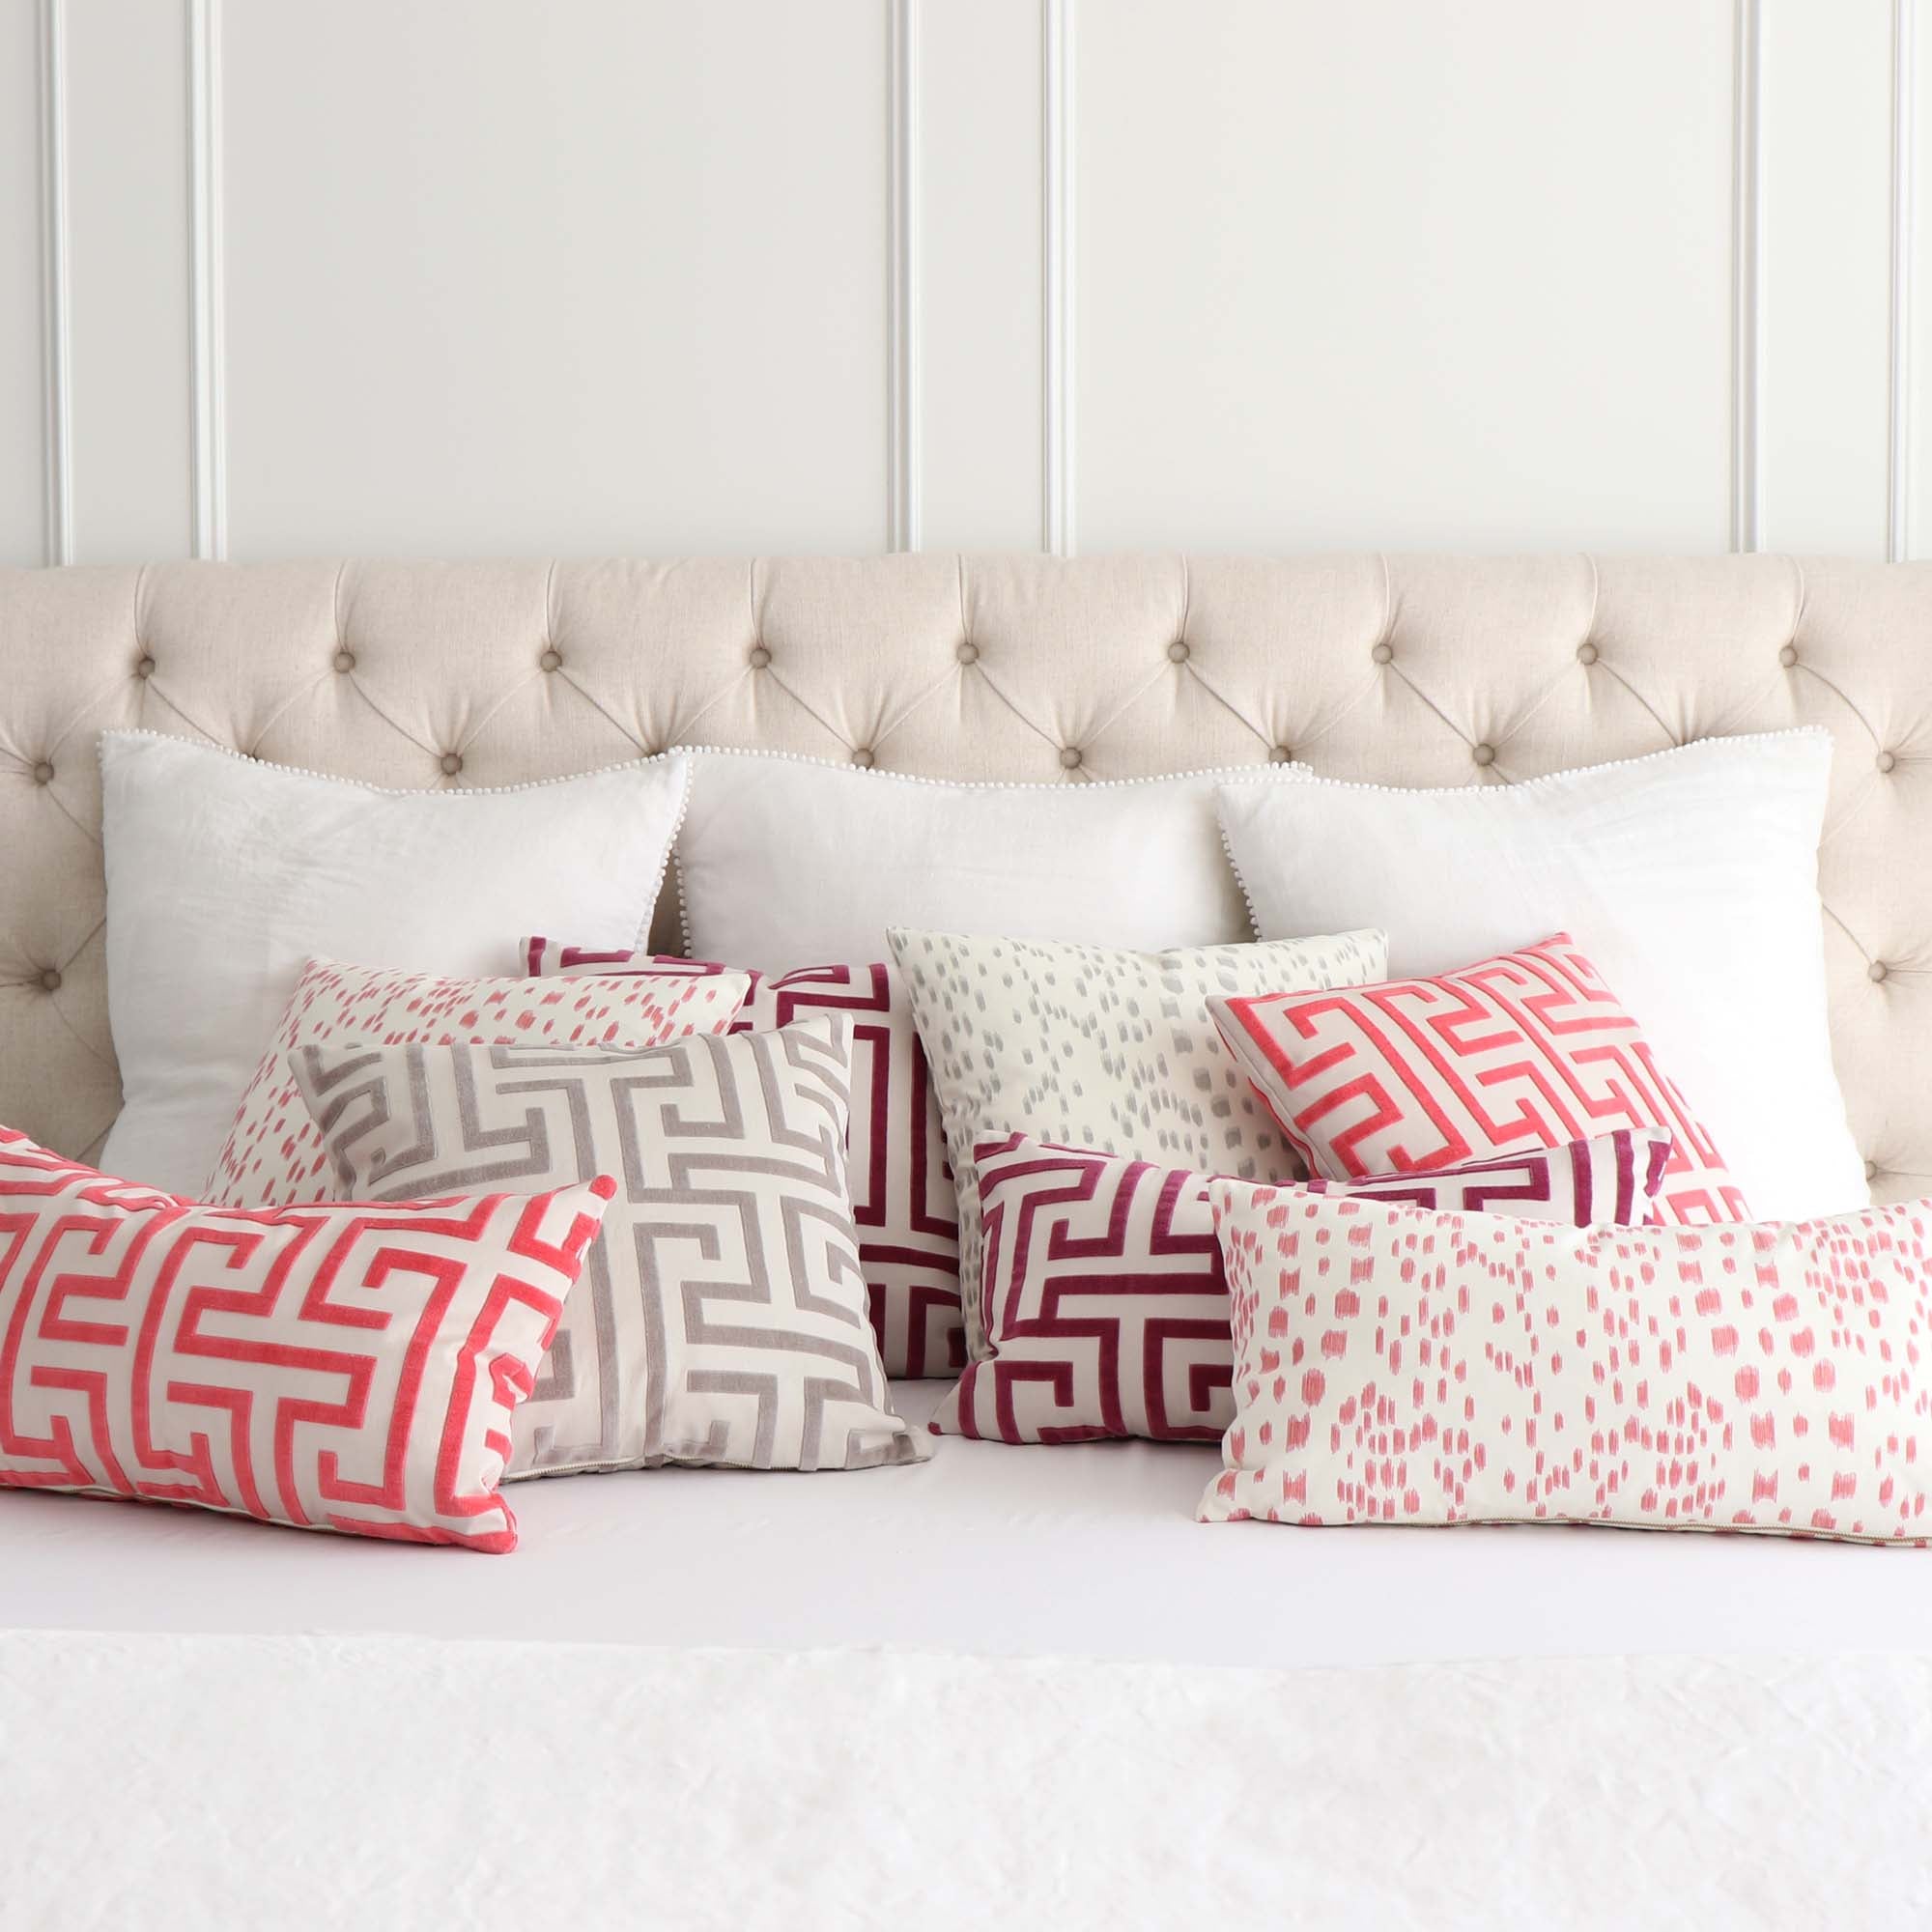 Luxe Brunschwig Fils Les Touches Berry Pink Throw Pillow - Chloe